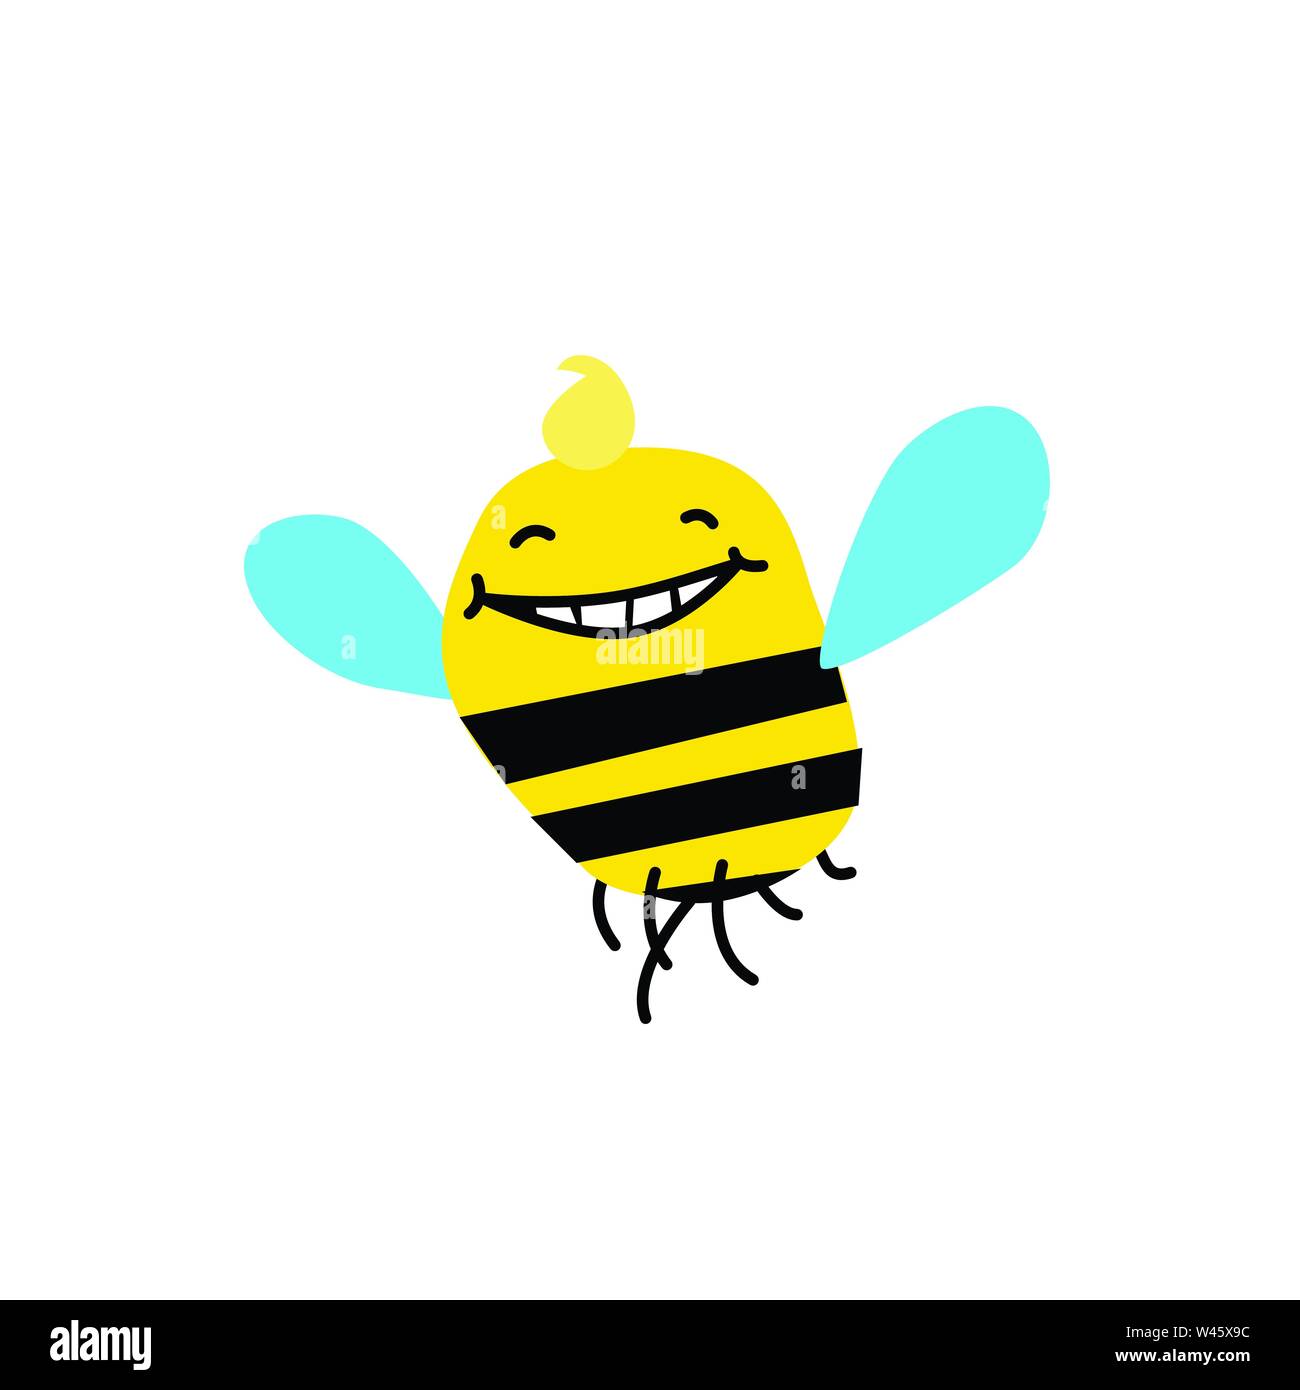 Illustration of a cartoon bee. Vector illustration. Funny bee, bumblebee. Image is isolated on white background. Mascot for the company. Stock Vector